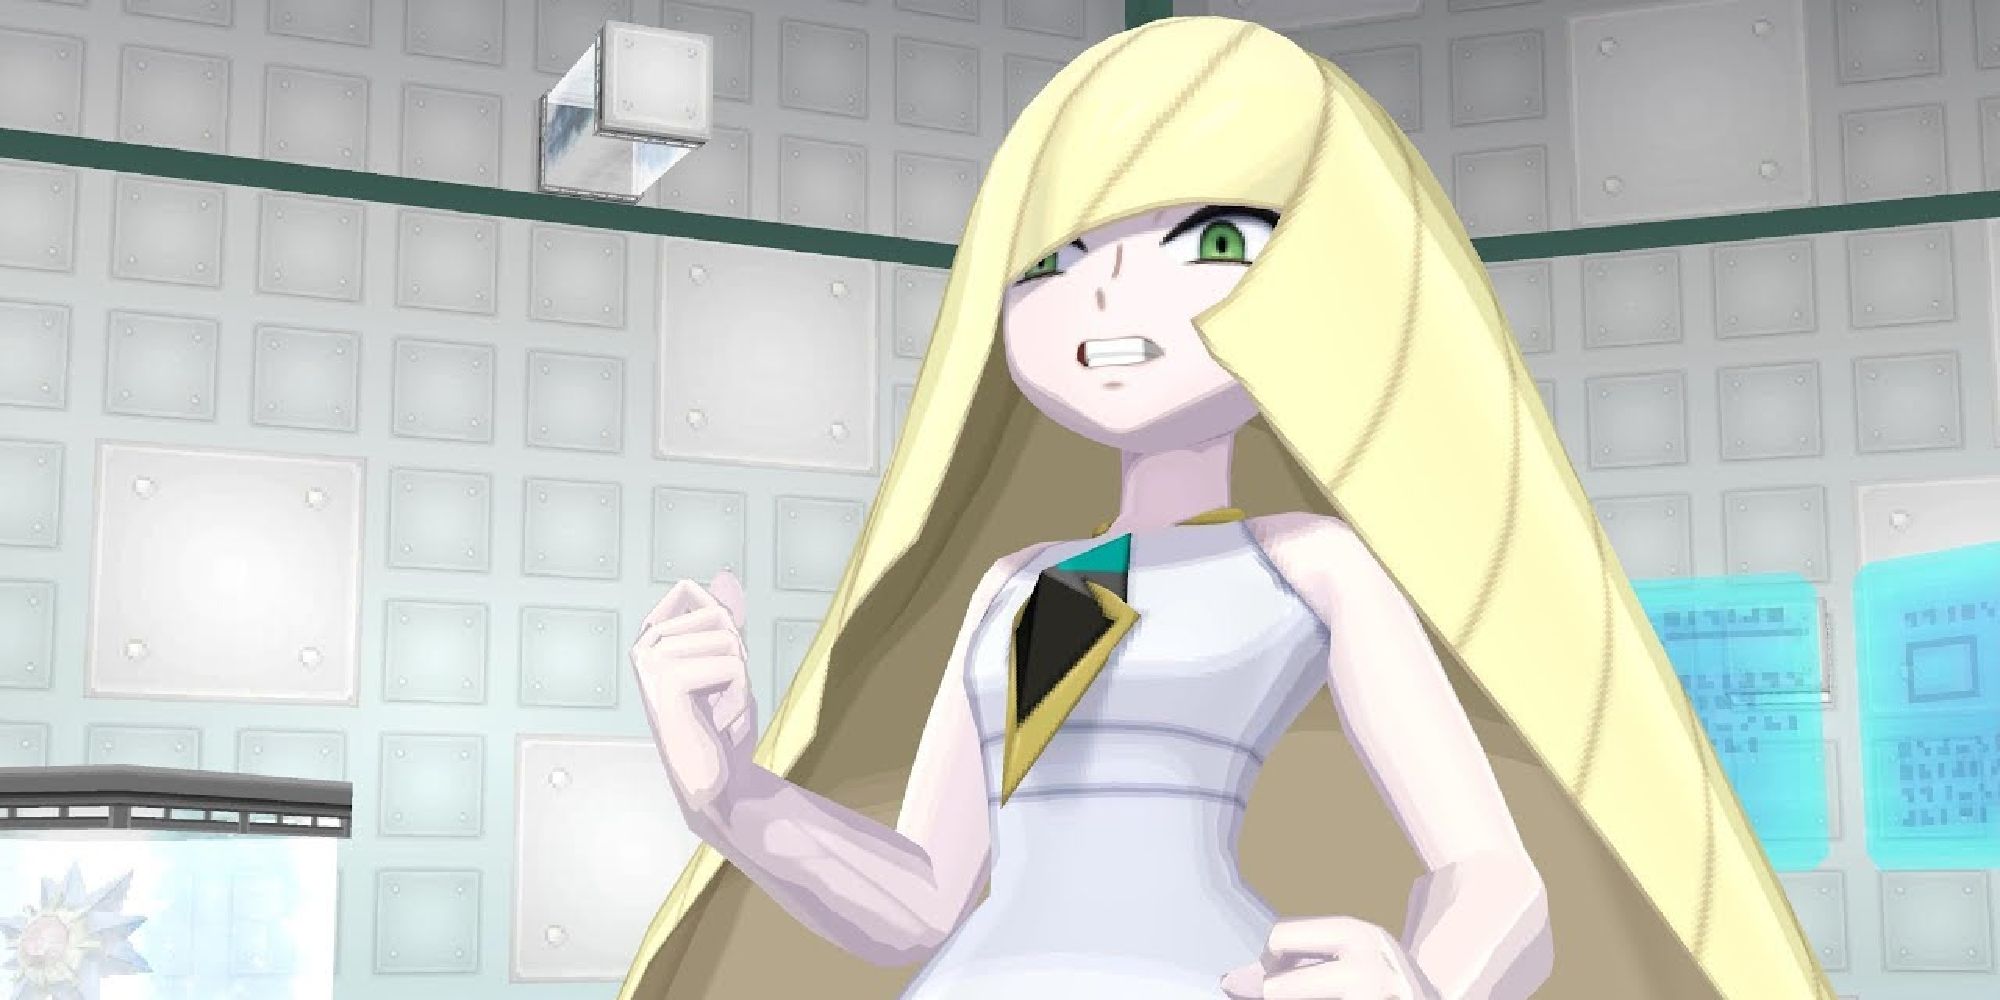 Lusamine angrily clenching her fist in her office at Aether Paradise